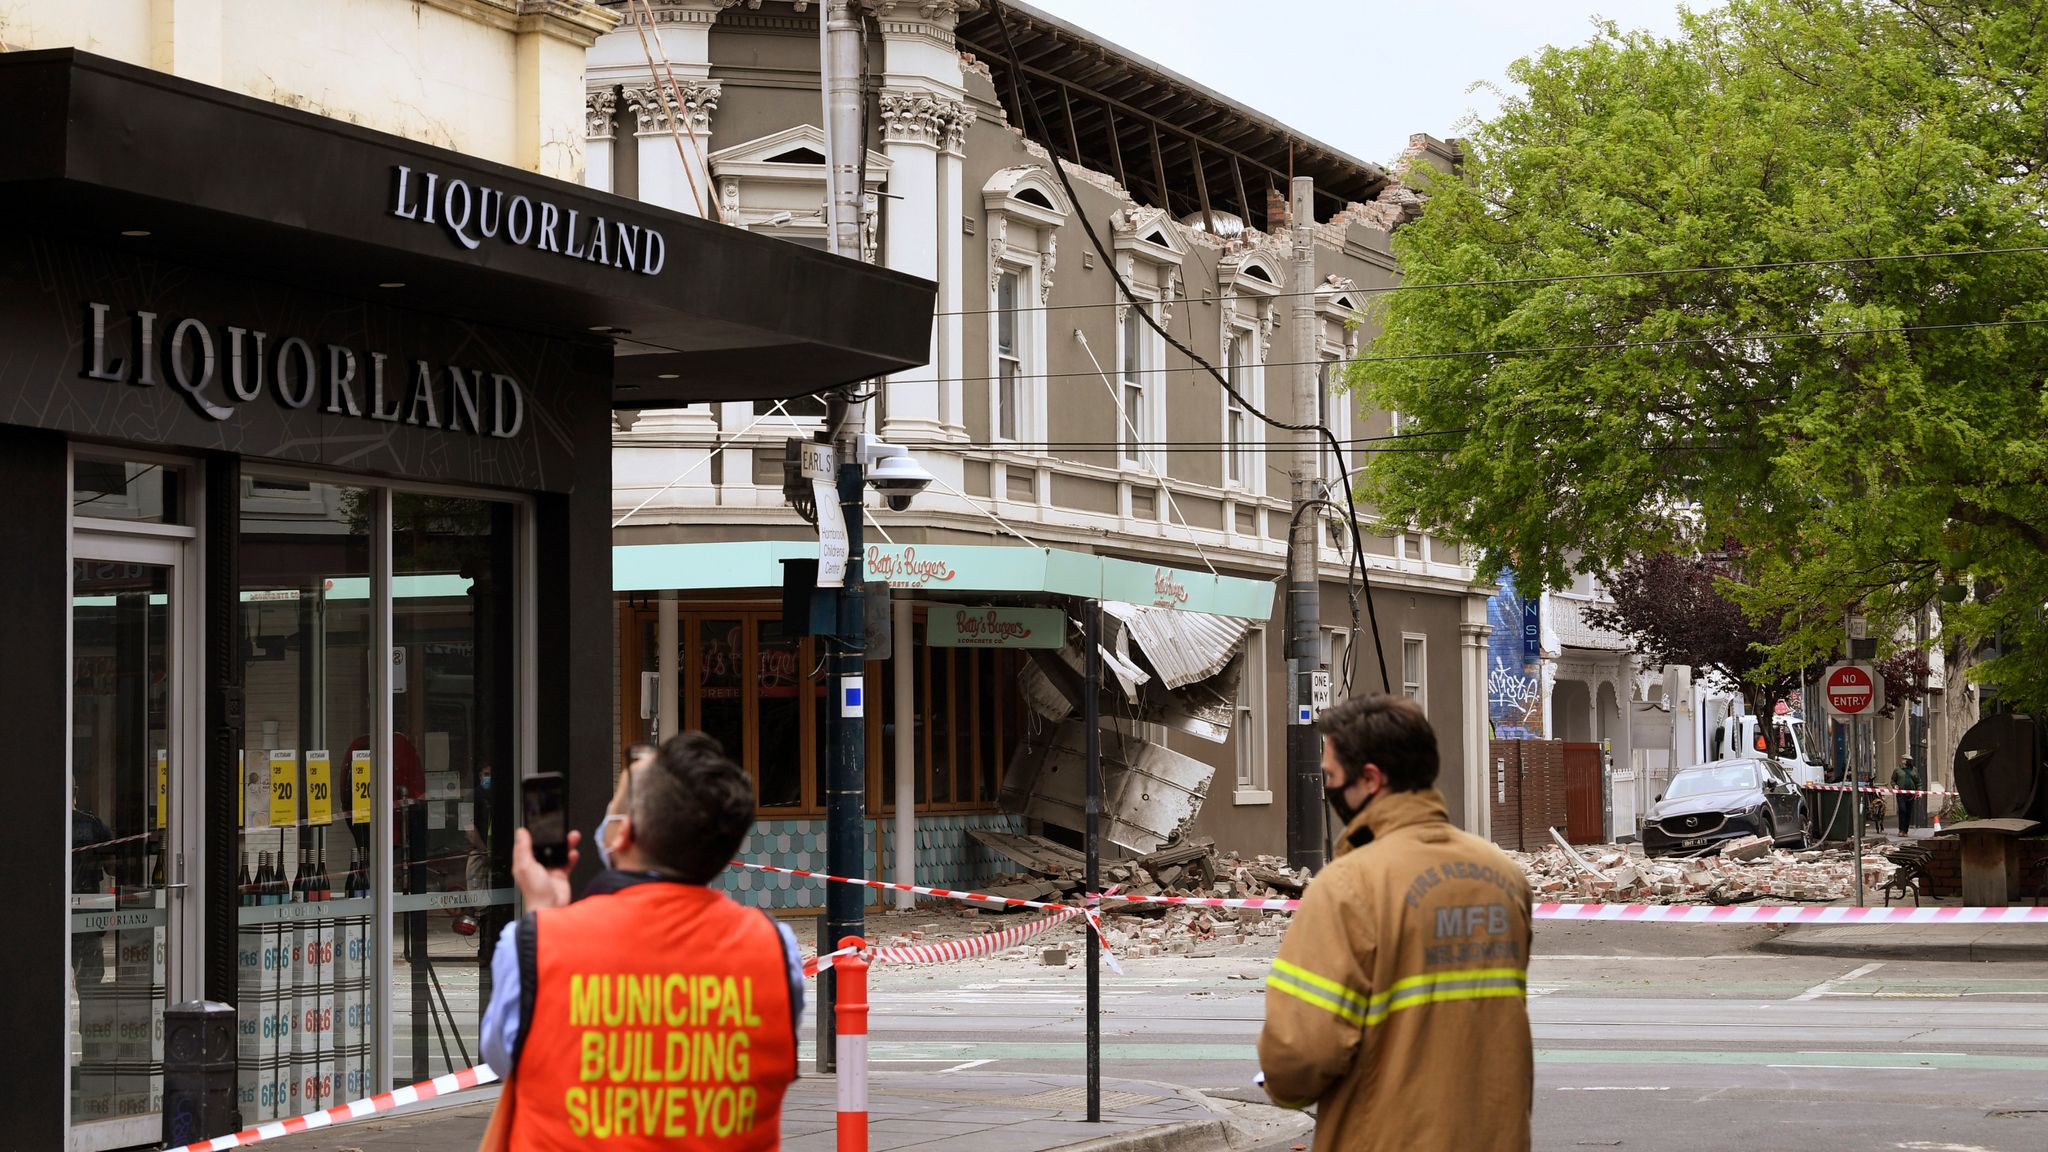 Melbourne earthquake 'Very disturbing event' as buildings damaged